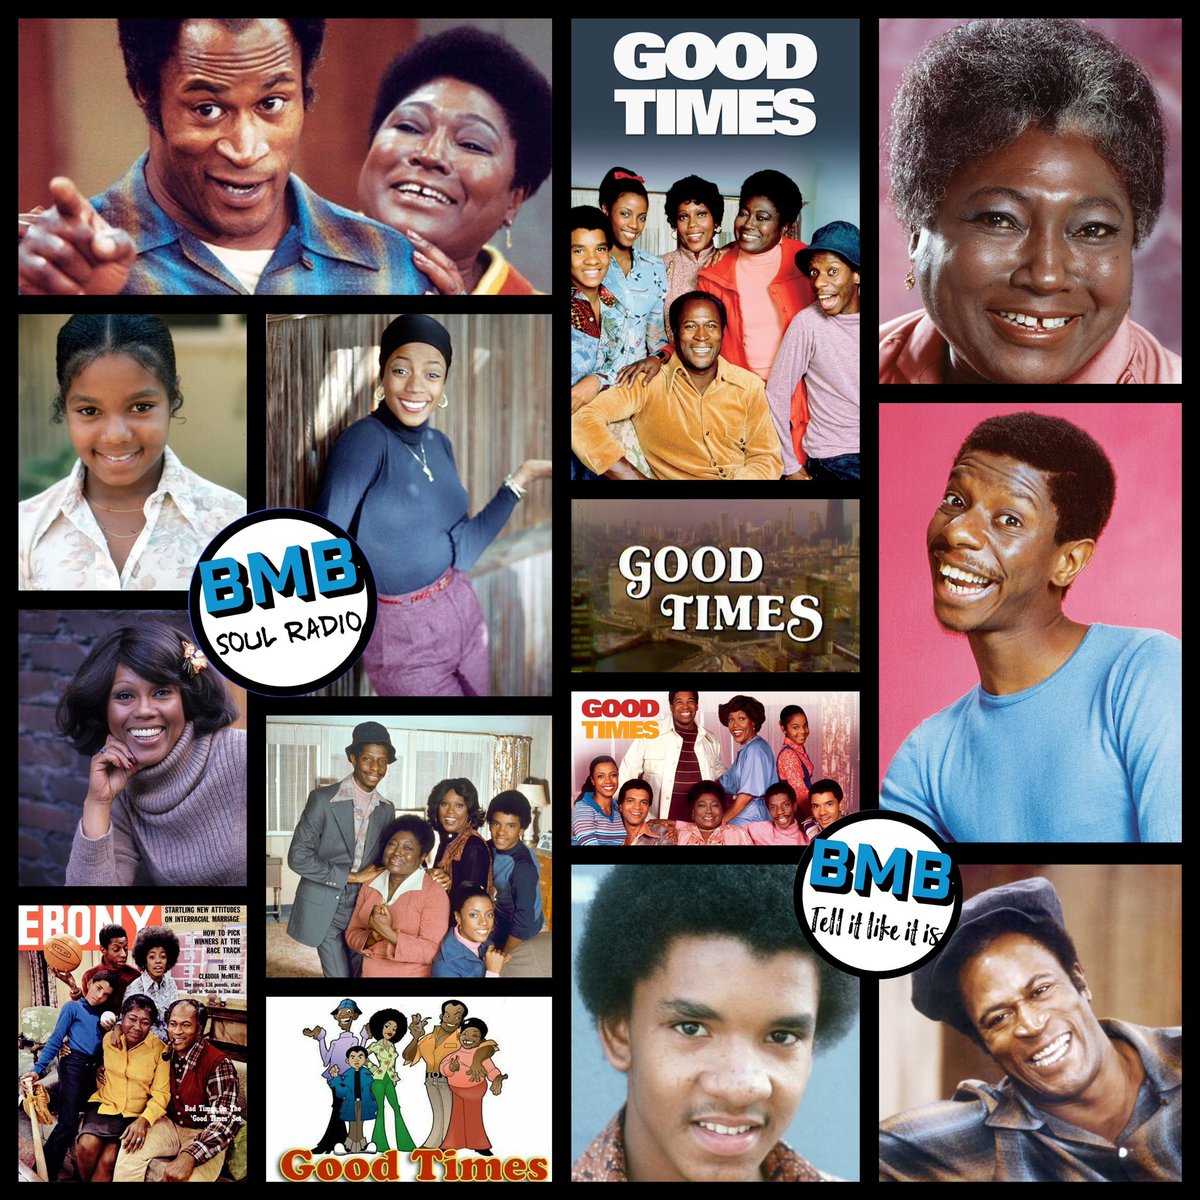 On this day 49 years ago, Good Times premiered on CBS on February 8, 1974. The sitcom lives on to this day! 
#goodtimes #CBS #sitcom #normanlear #blacktv #blacksitcoms #chicago